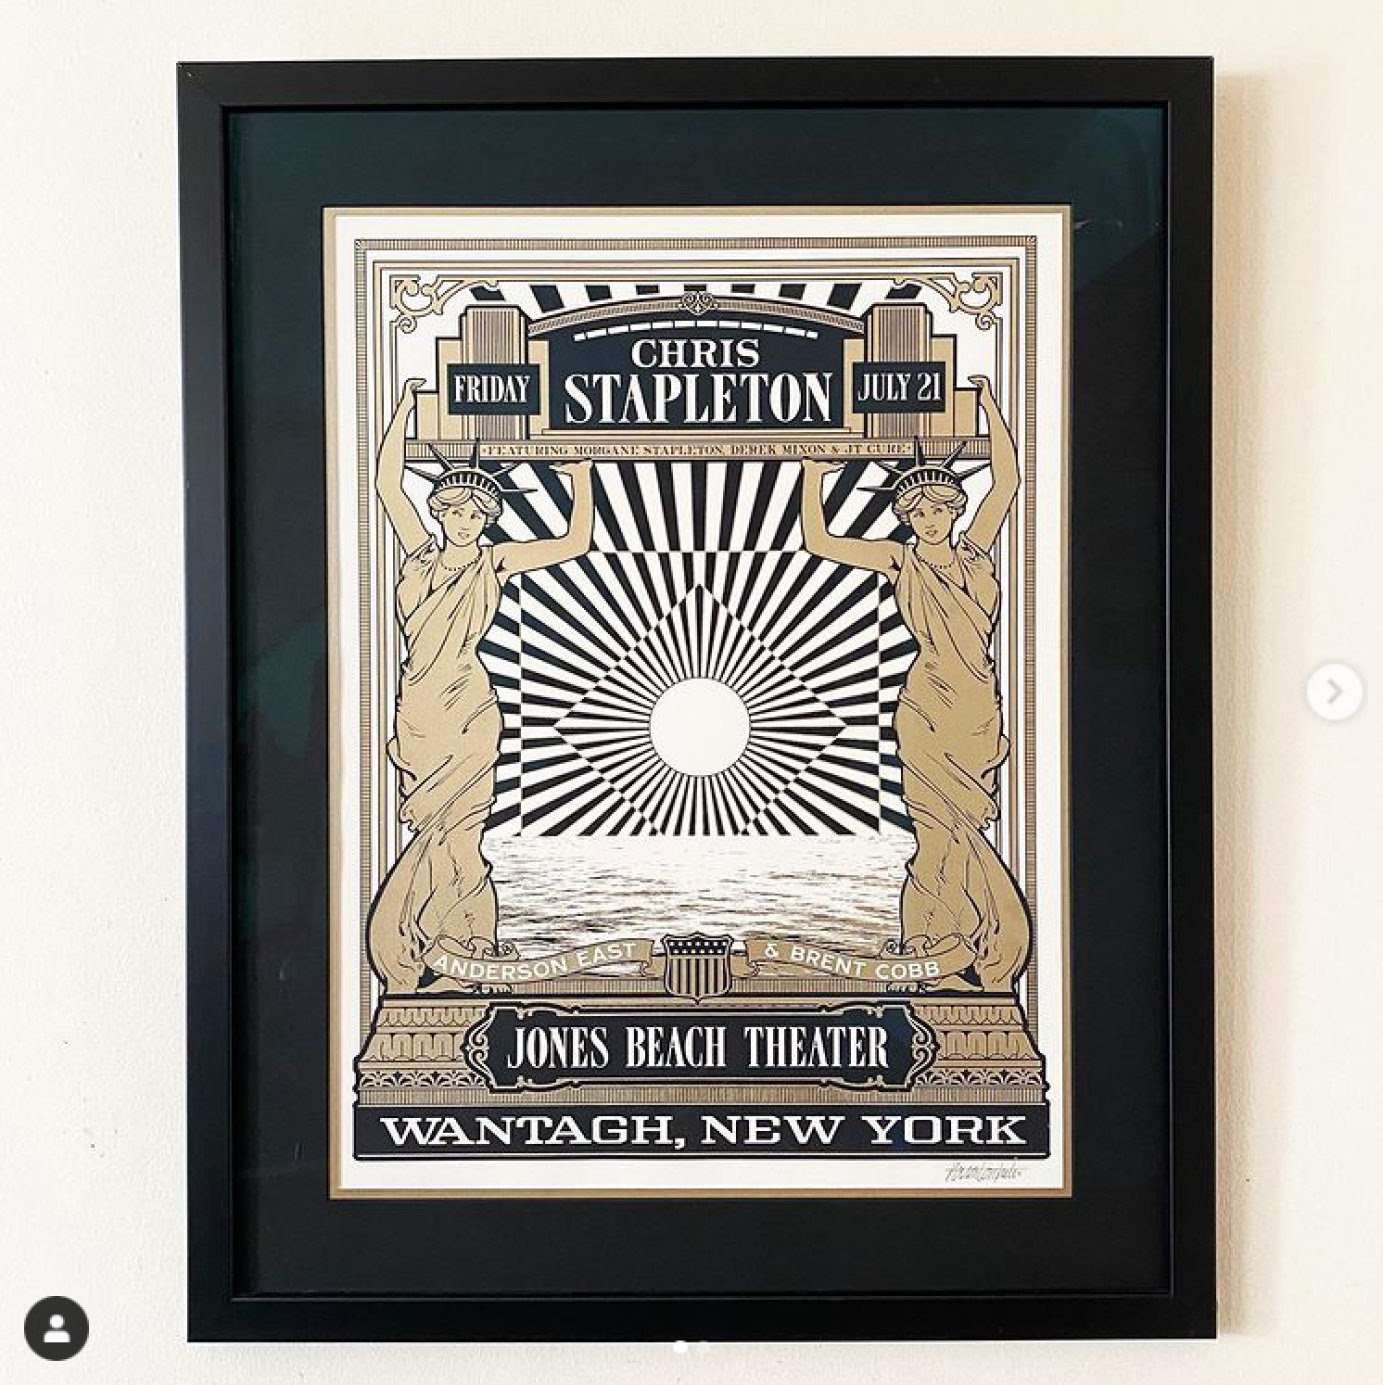 Black & Gold themed Posters by Rockswell